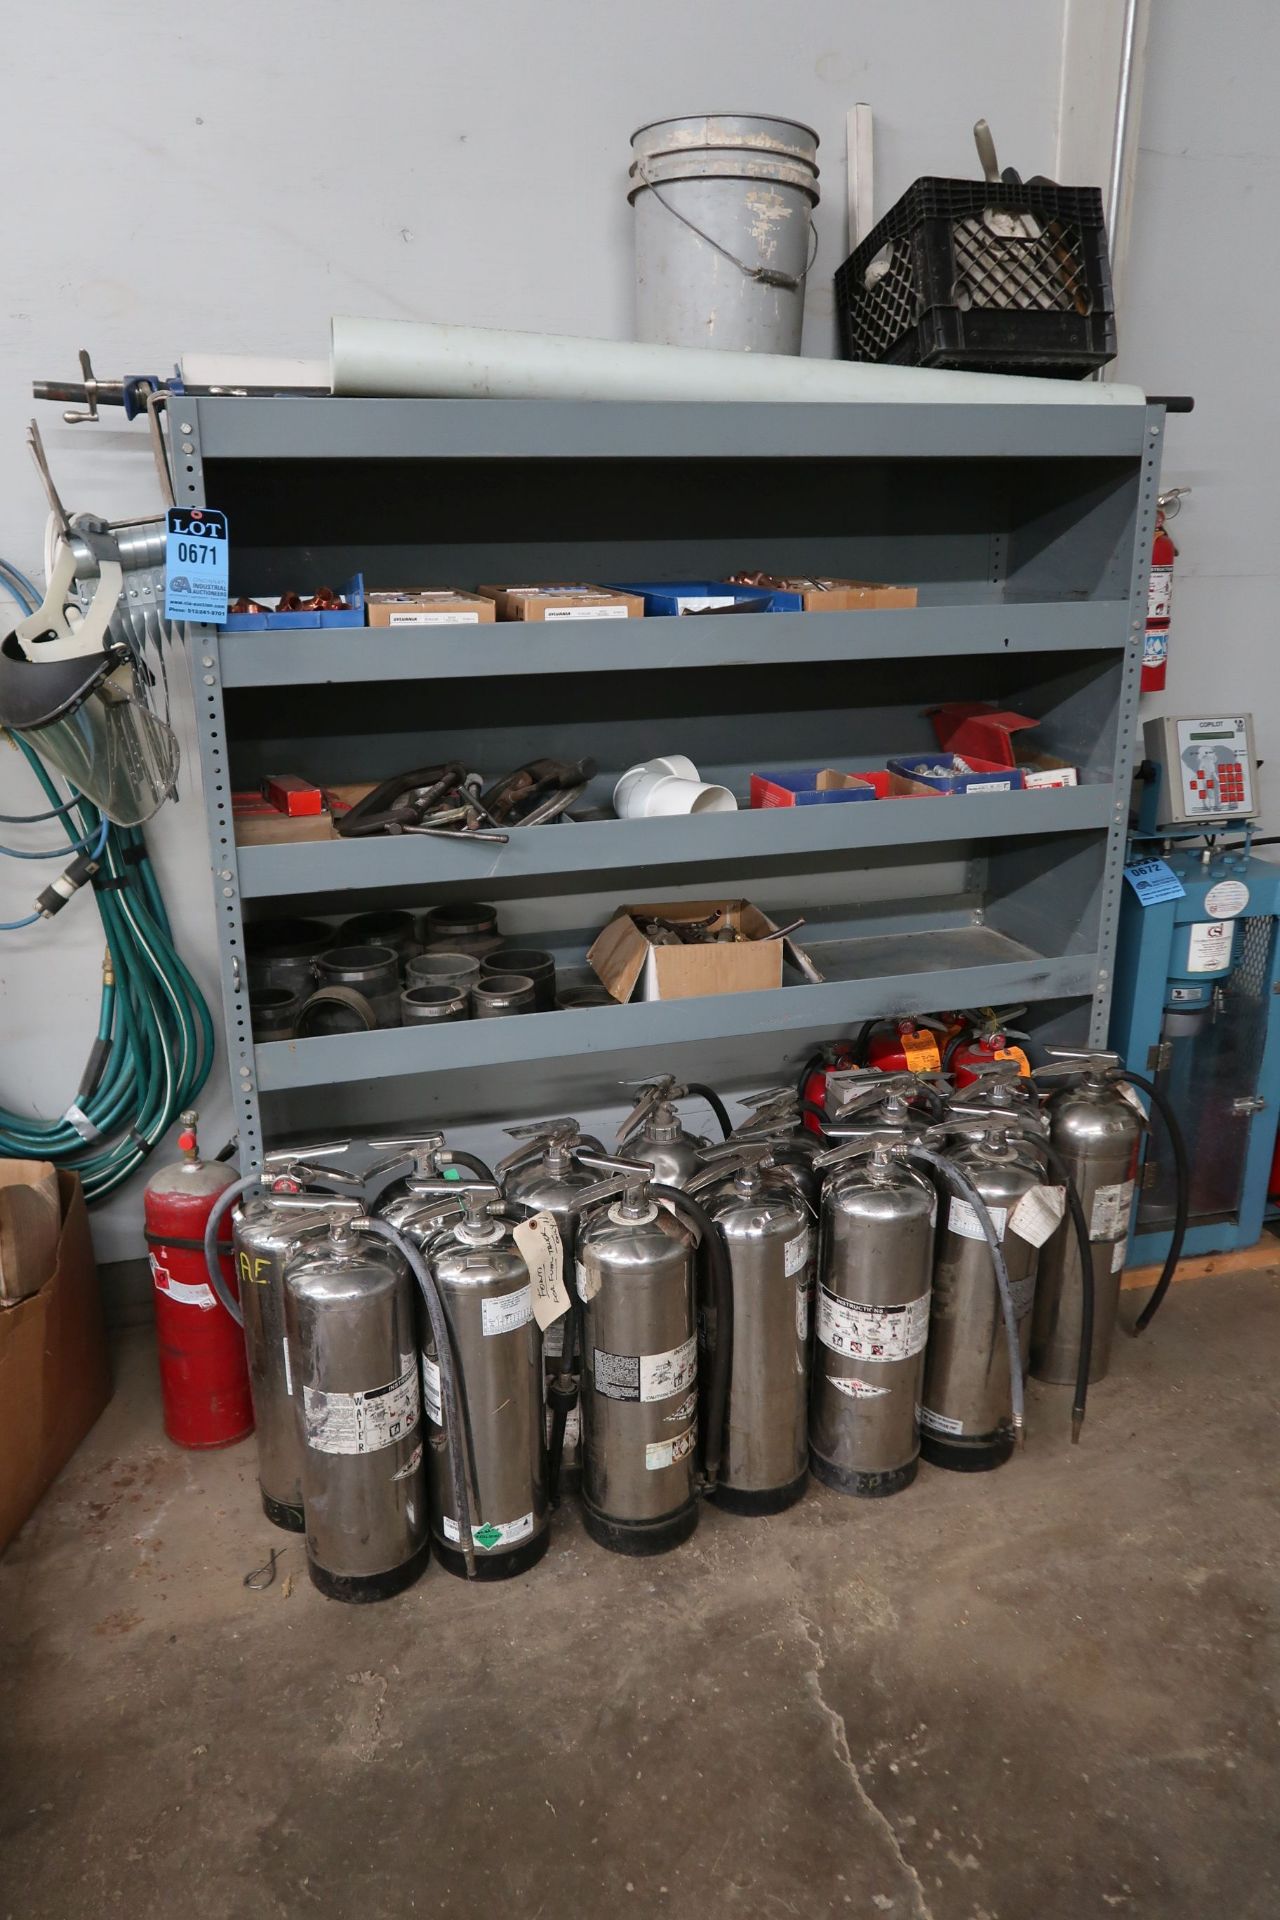 CONTENTS OF SHELF INCLUDING FIRE EXTINGUISHERS, C-CLAMPS, PIPE FITTINGS, HARDWARE, POLE CLAMPS